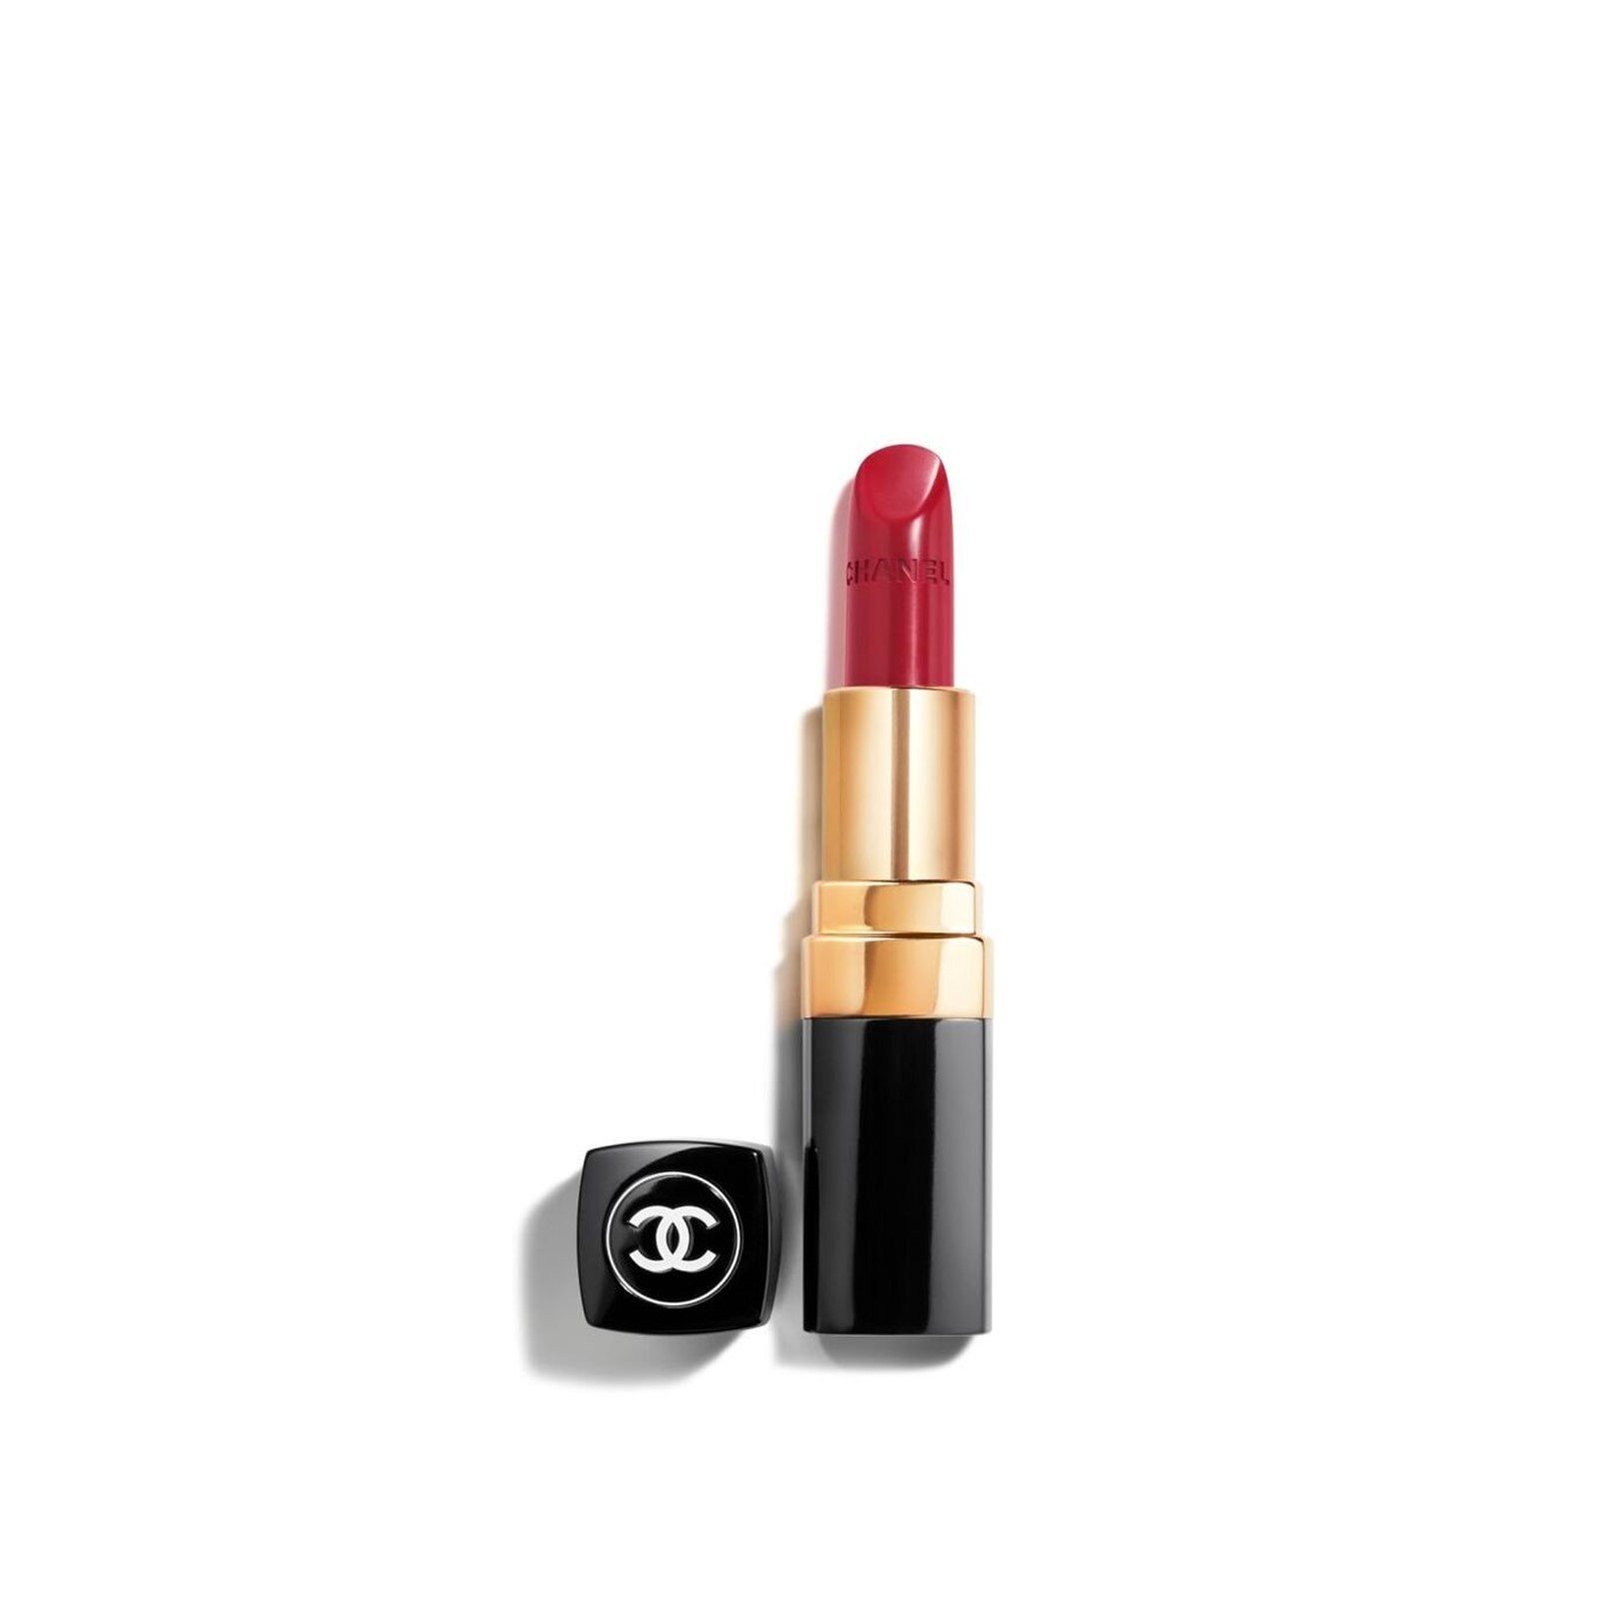 CHANEL Rouge Coco Ultra Hydrating Lip Colour 484 Rouge Intimiste 3.5g (0.12oz)